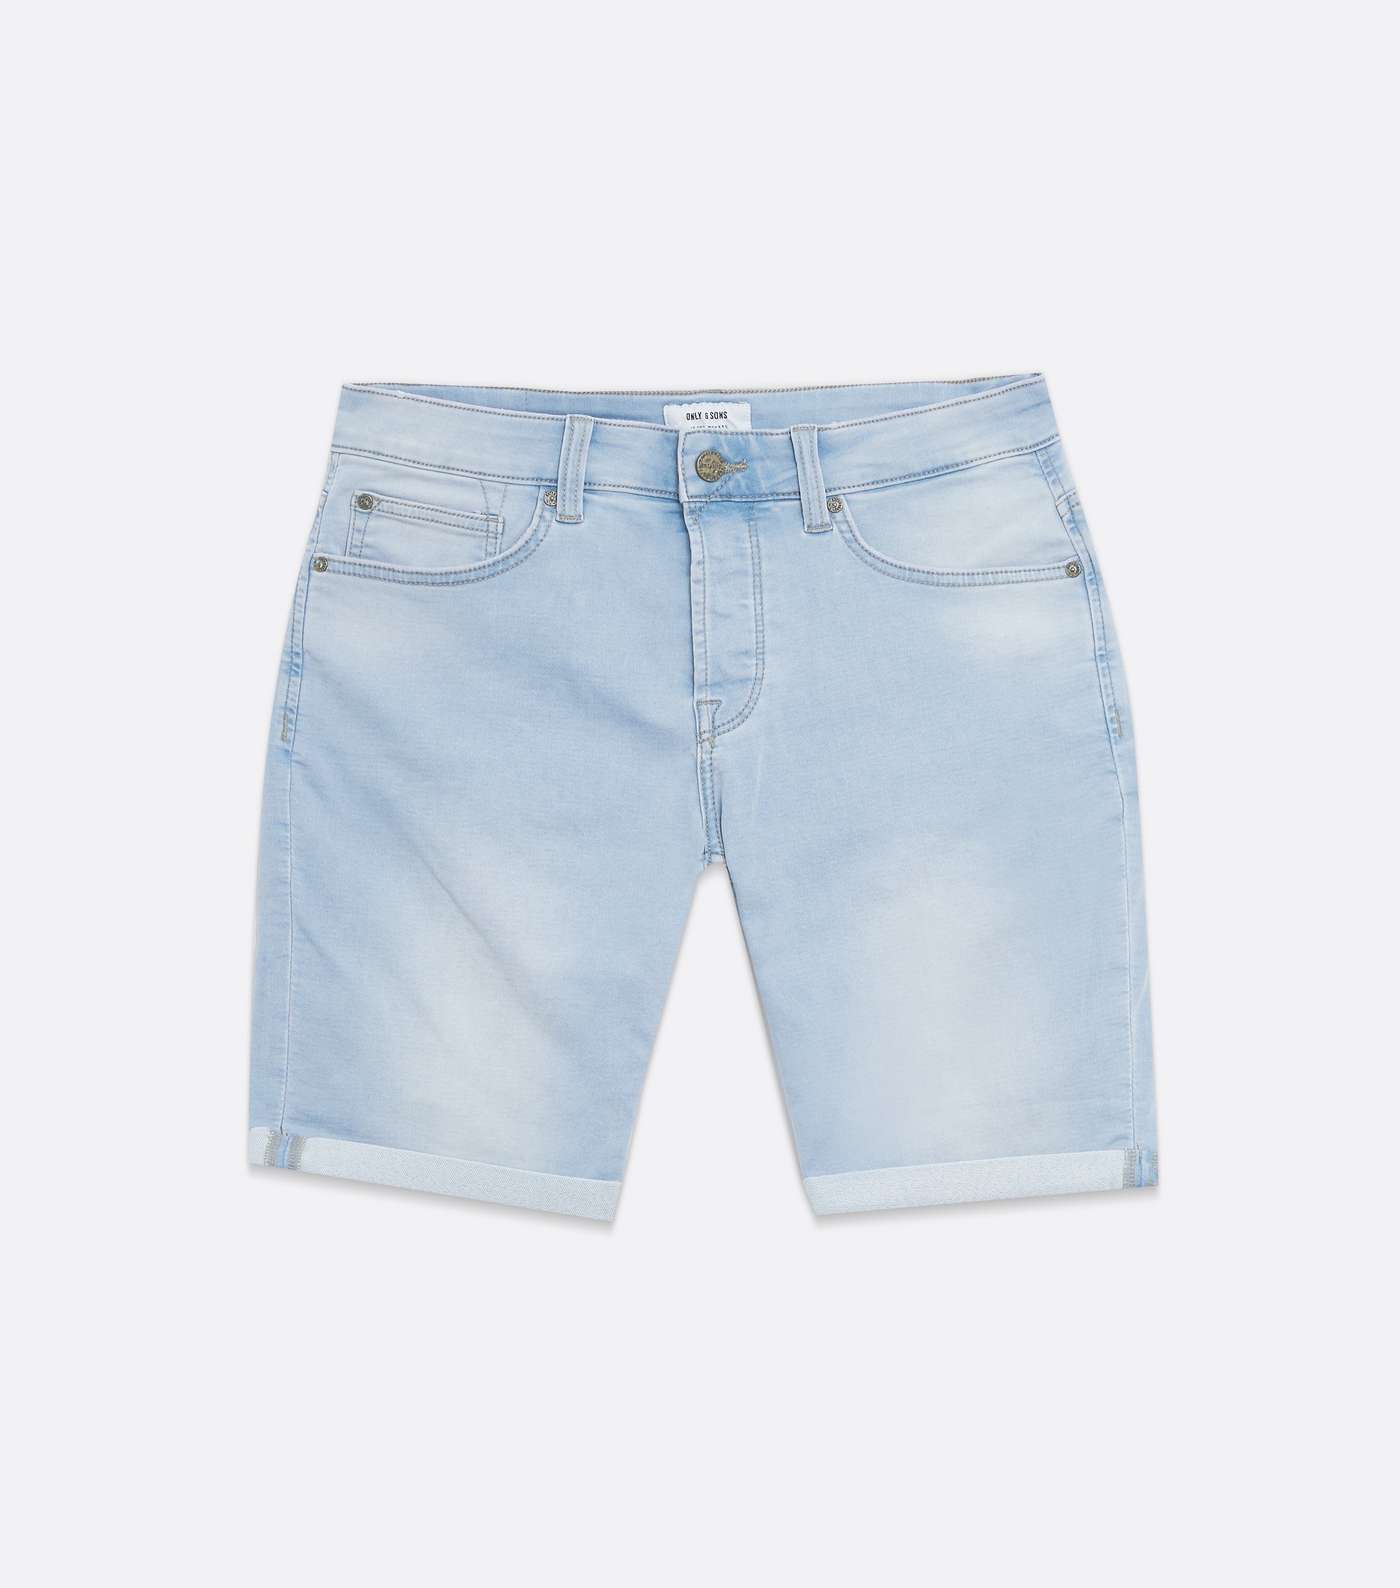 Only & Sons Pale Blue Denim Shorts Image 5